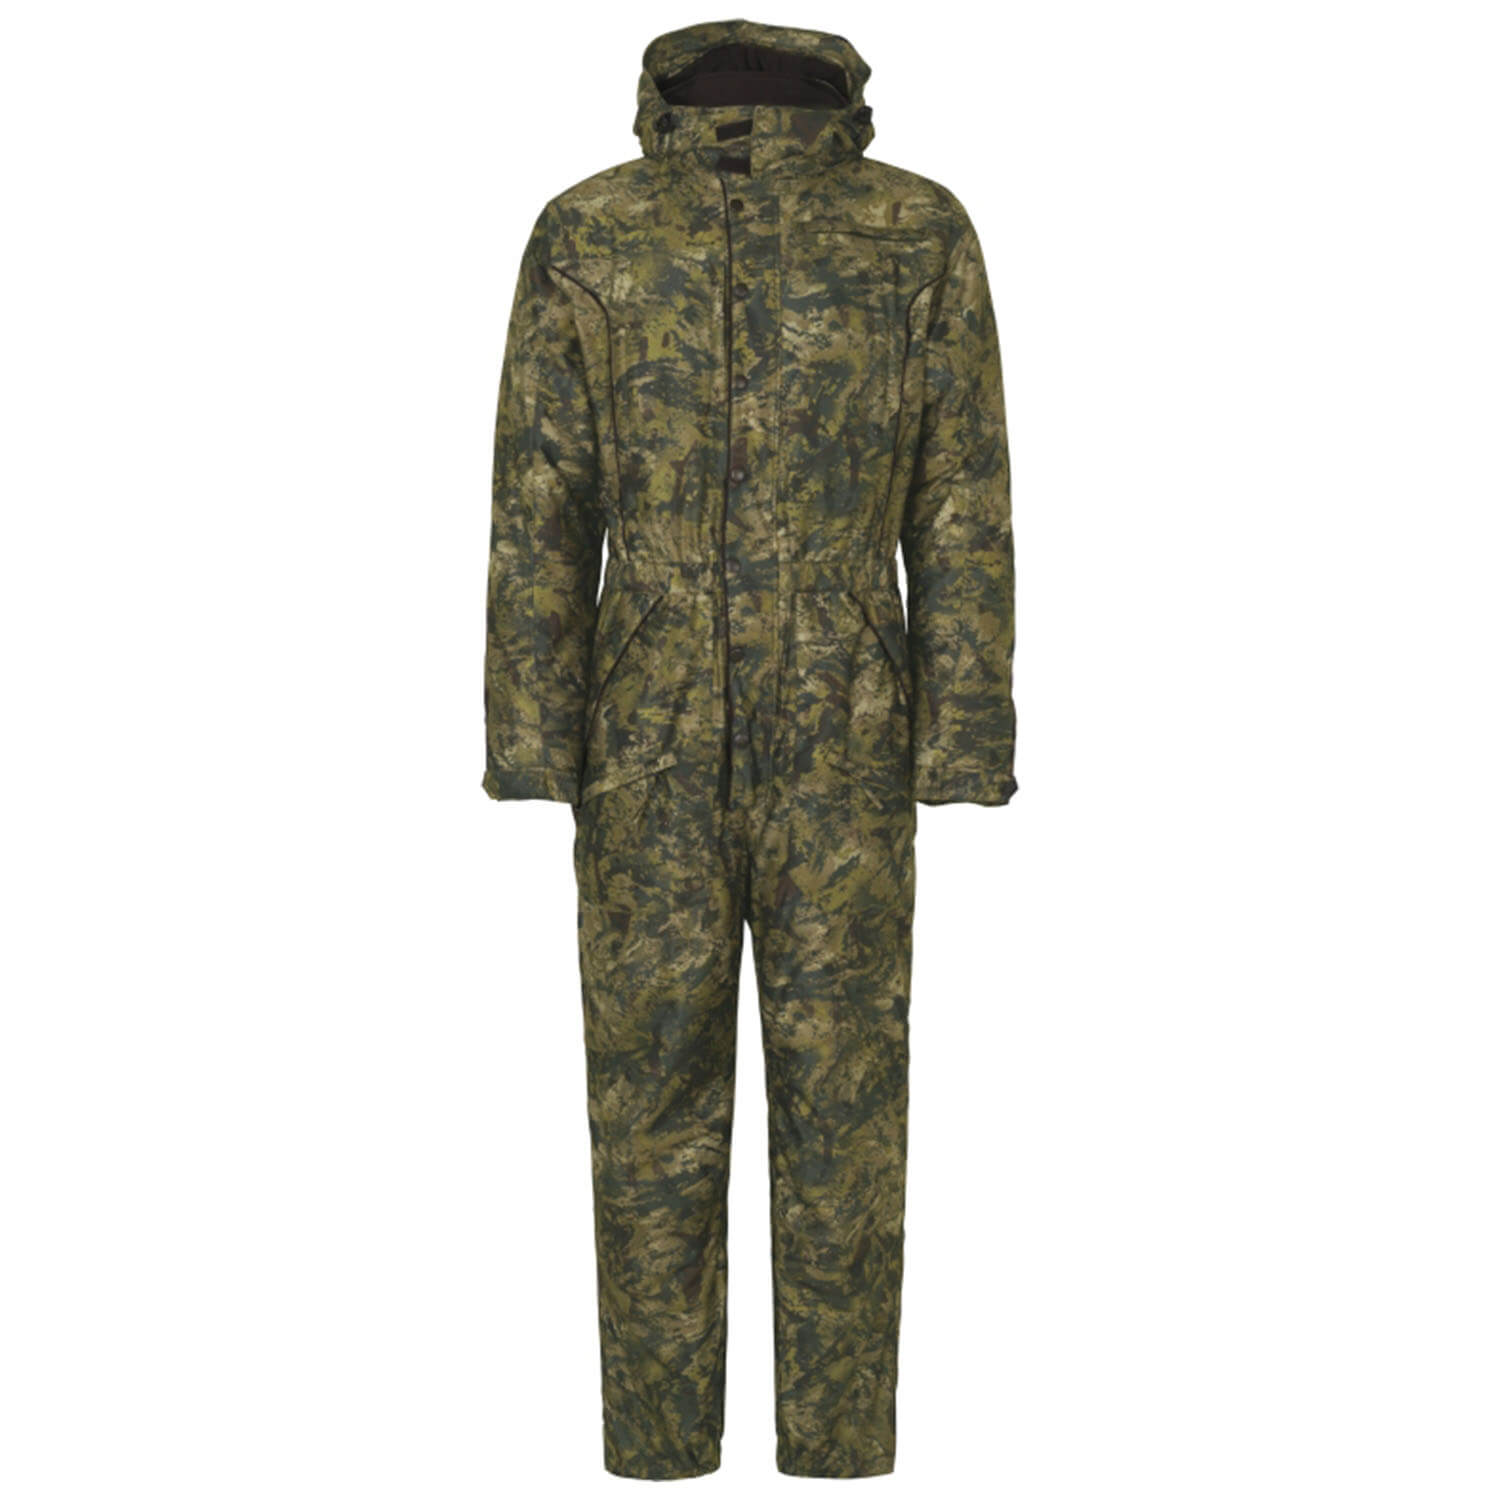 Seeland Overall Outthere (invis green) - Winter Hunting Clothing